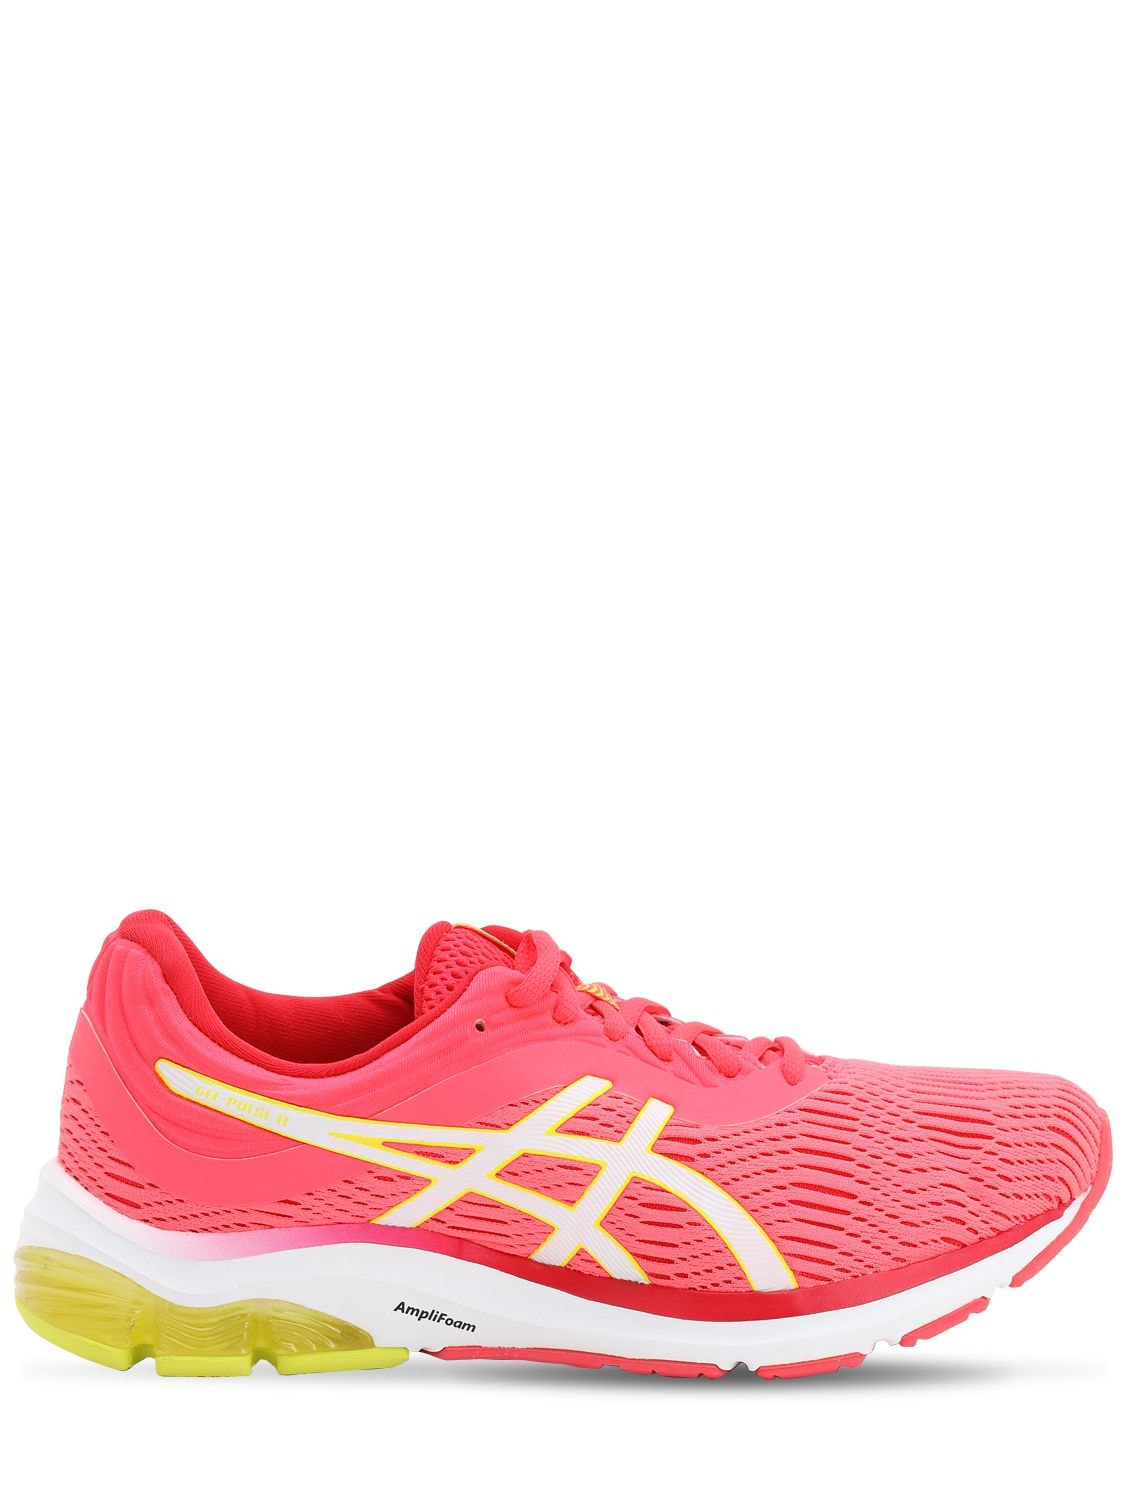 Asics Gel-pulse 11 Running Trainers In Laser Pink